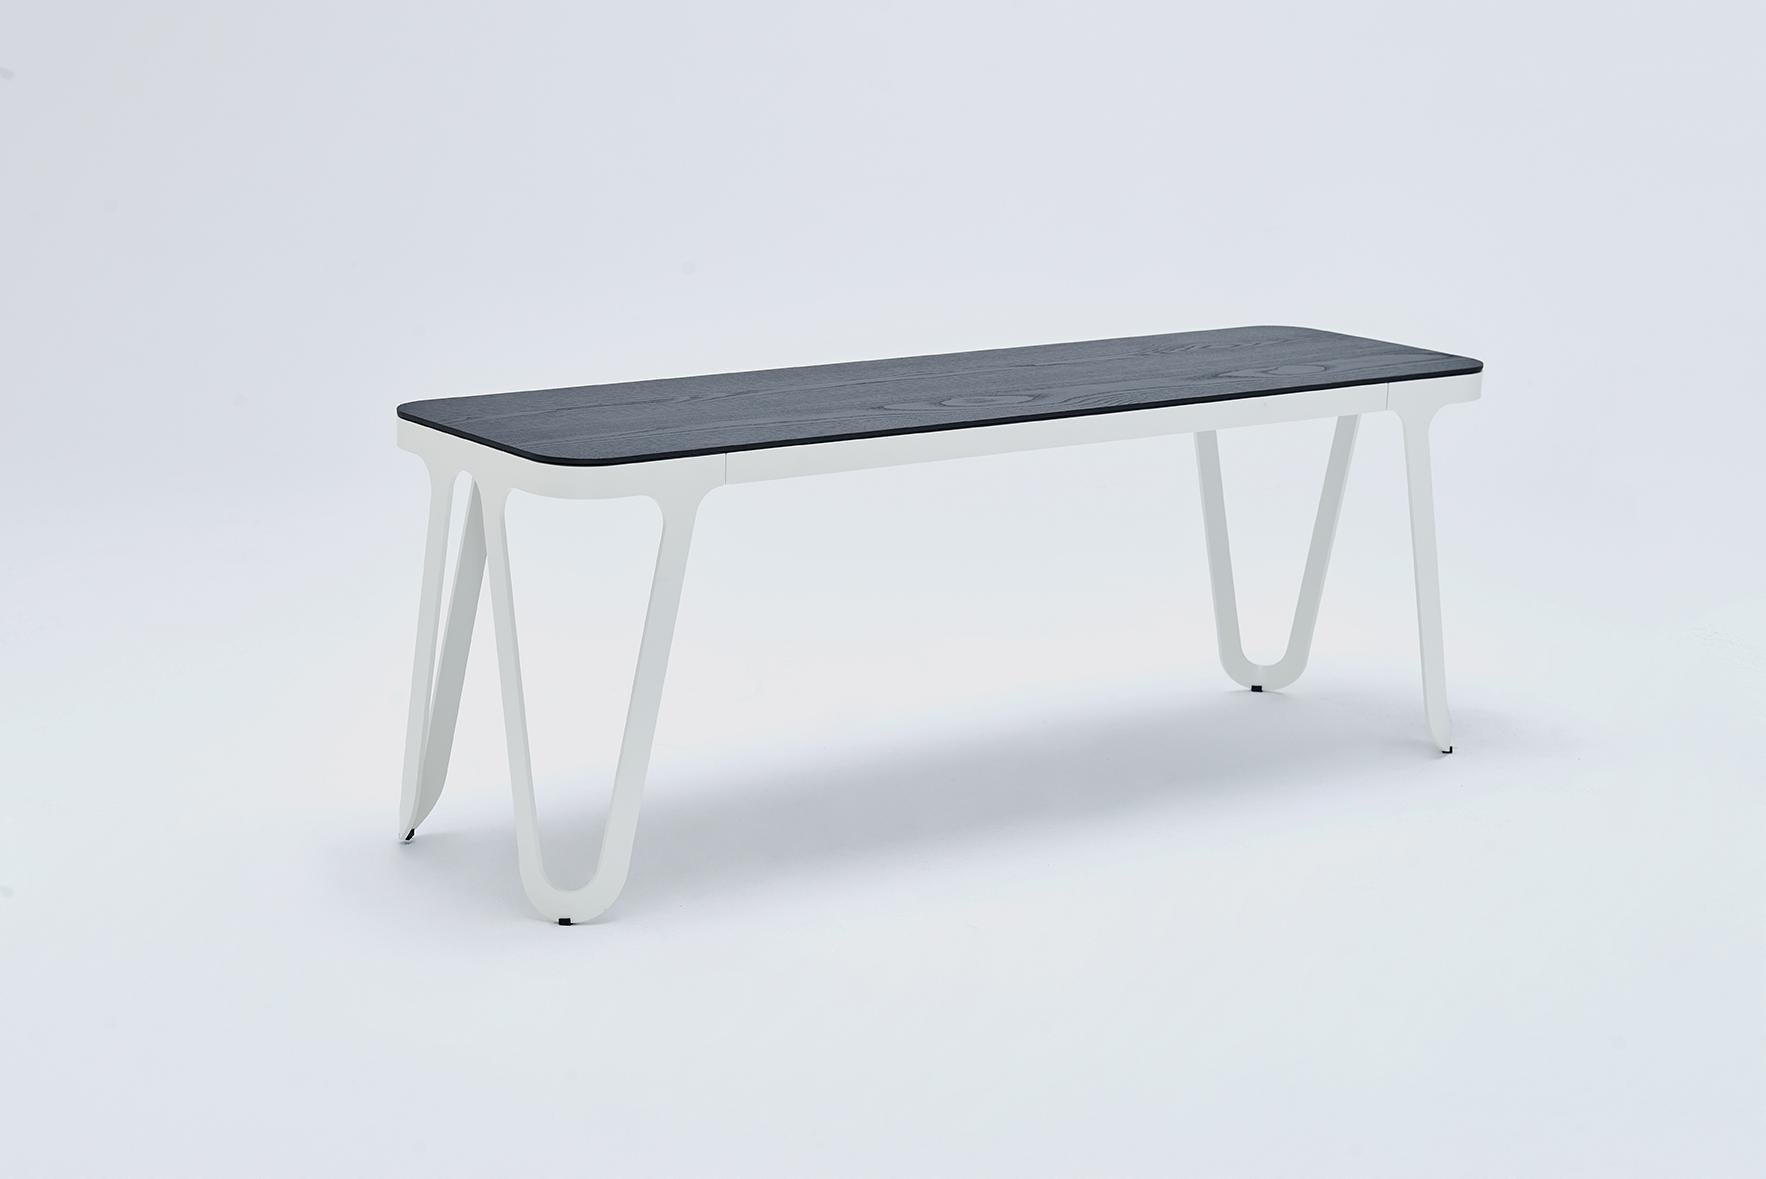 Loop Bench 240 Oak by Sebastian Scherer
Material: Aluminium, Oak
Dimensions: D240x W38 x H45 cm.
Weight: 28.6 kg
Also Available: Colours: solid wood (matt lacquered): black and white stained ash / natural oak / american walnut
frame (matt):